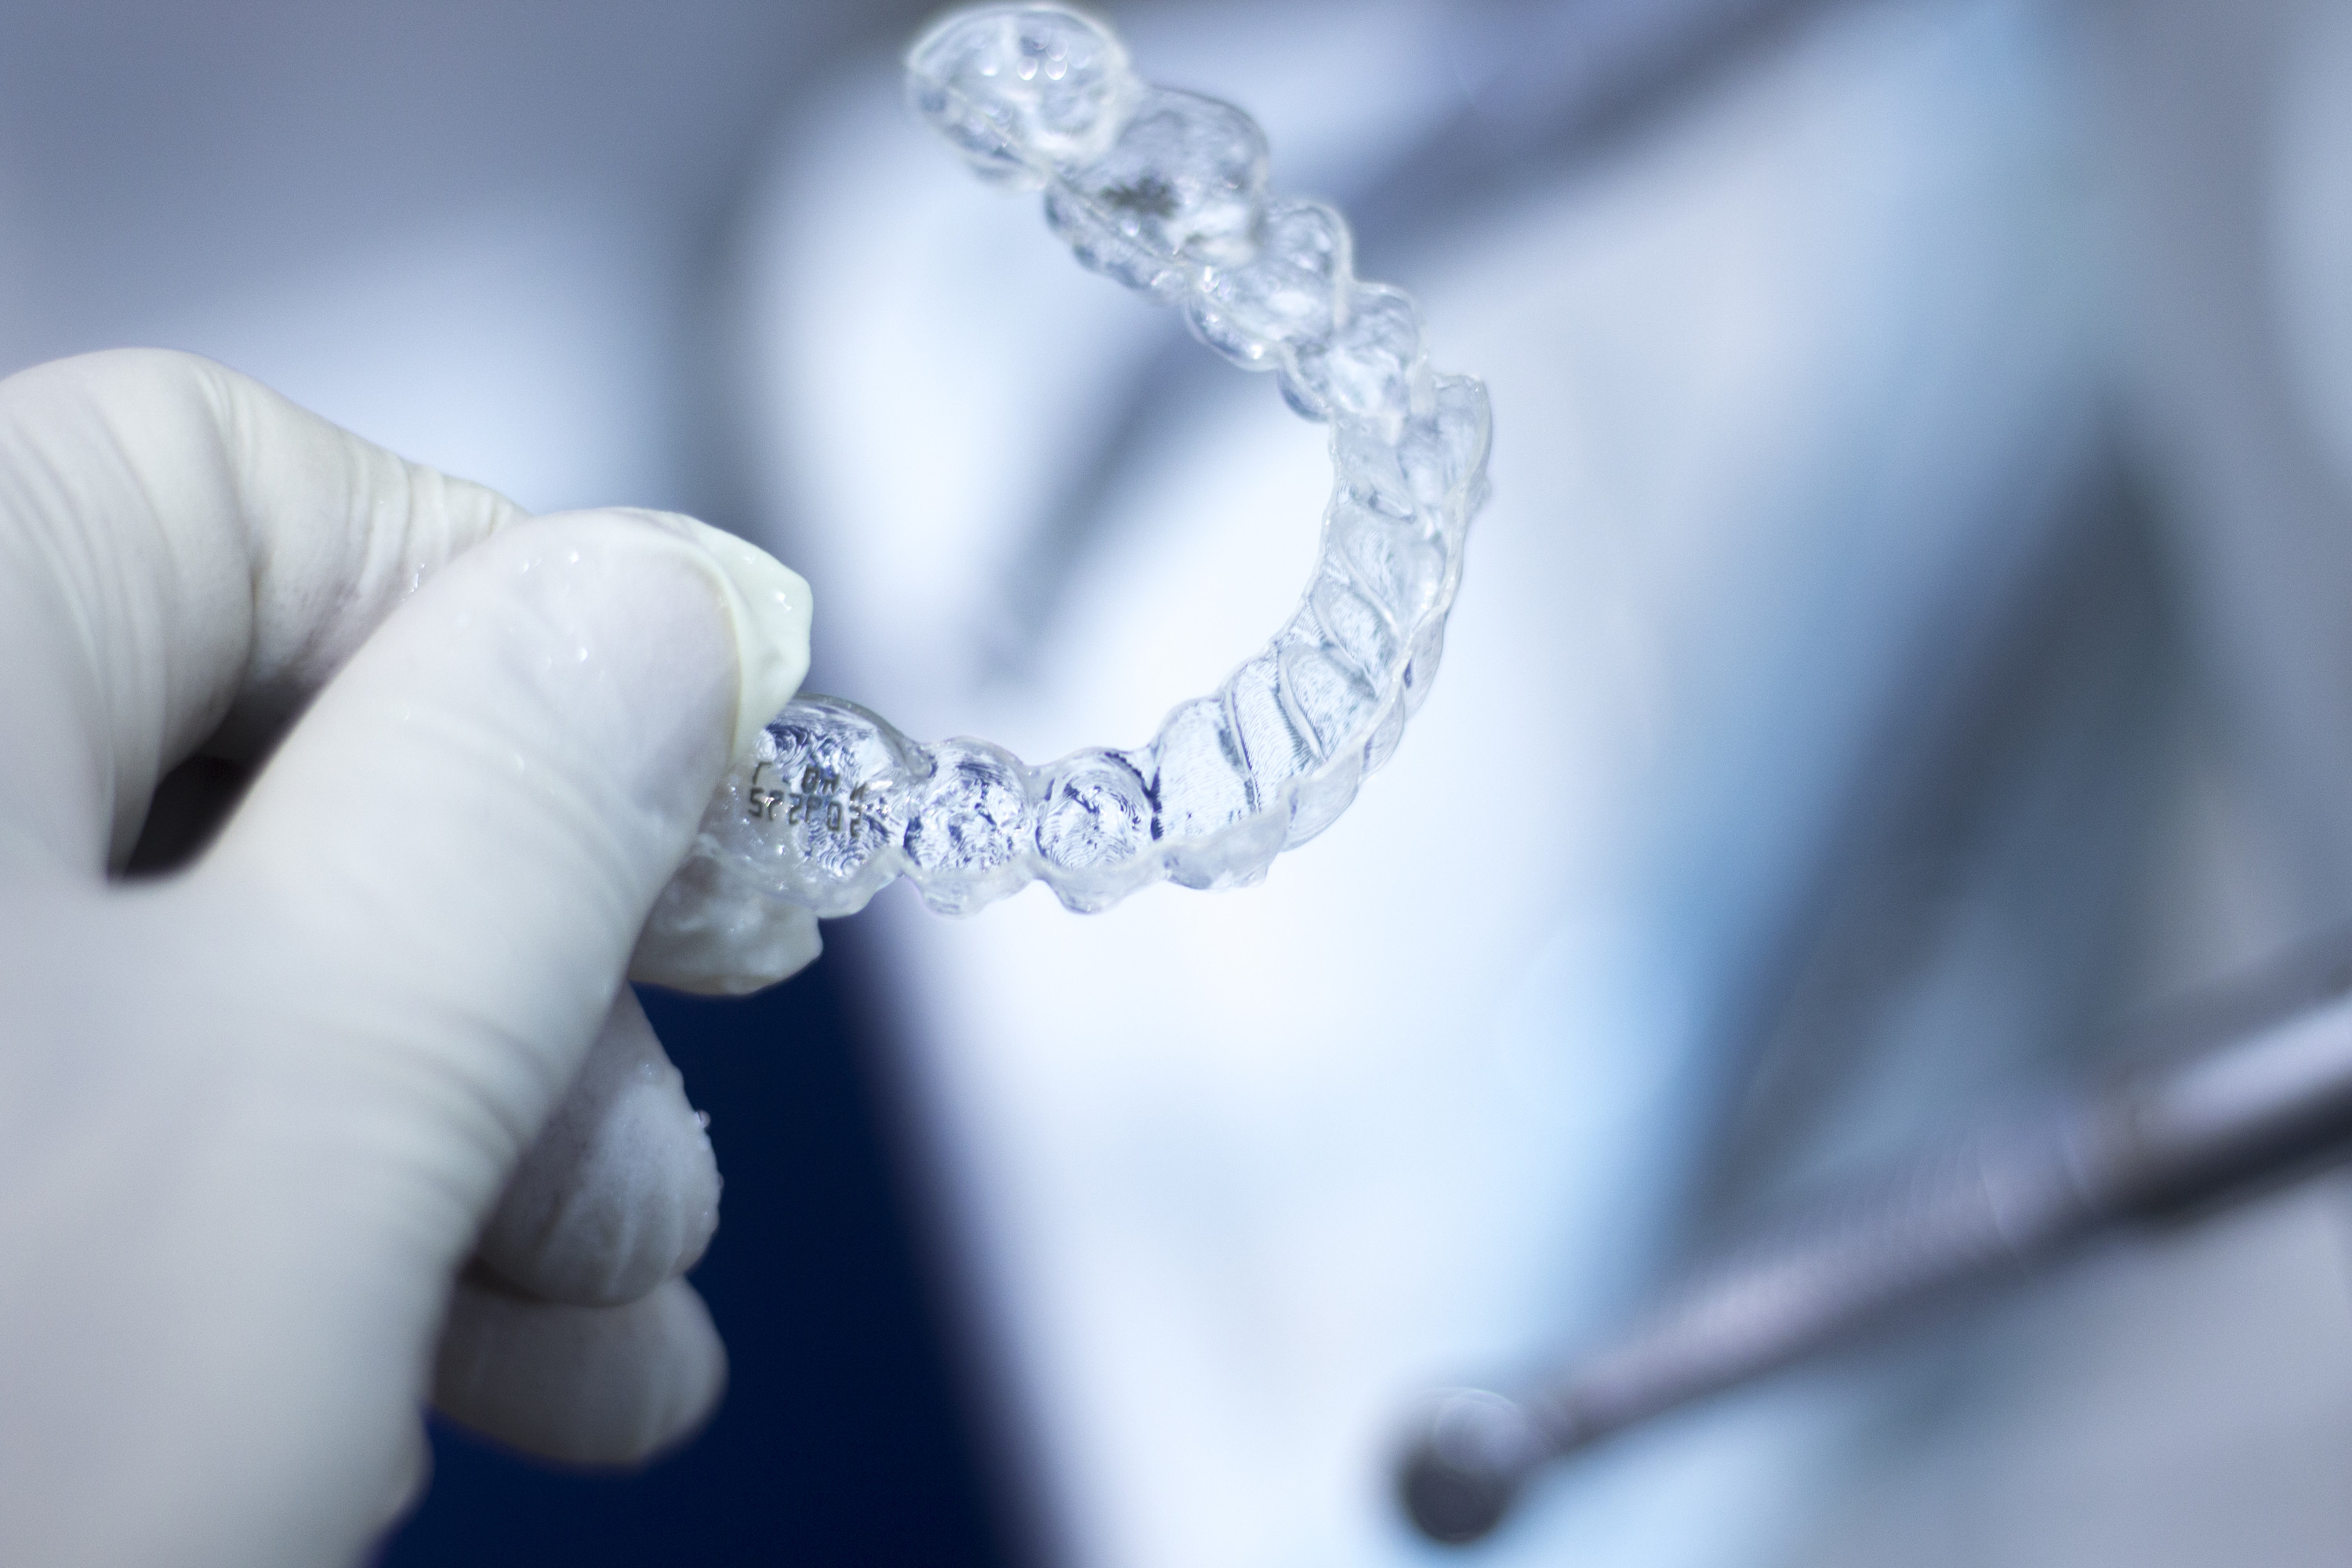 does Invisalign have a headache risk